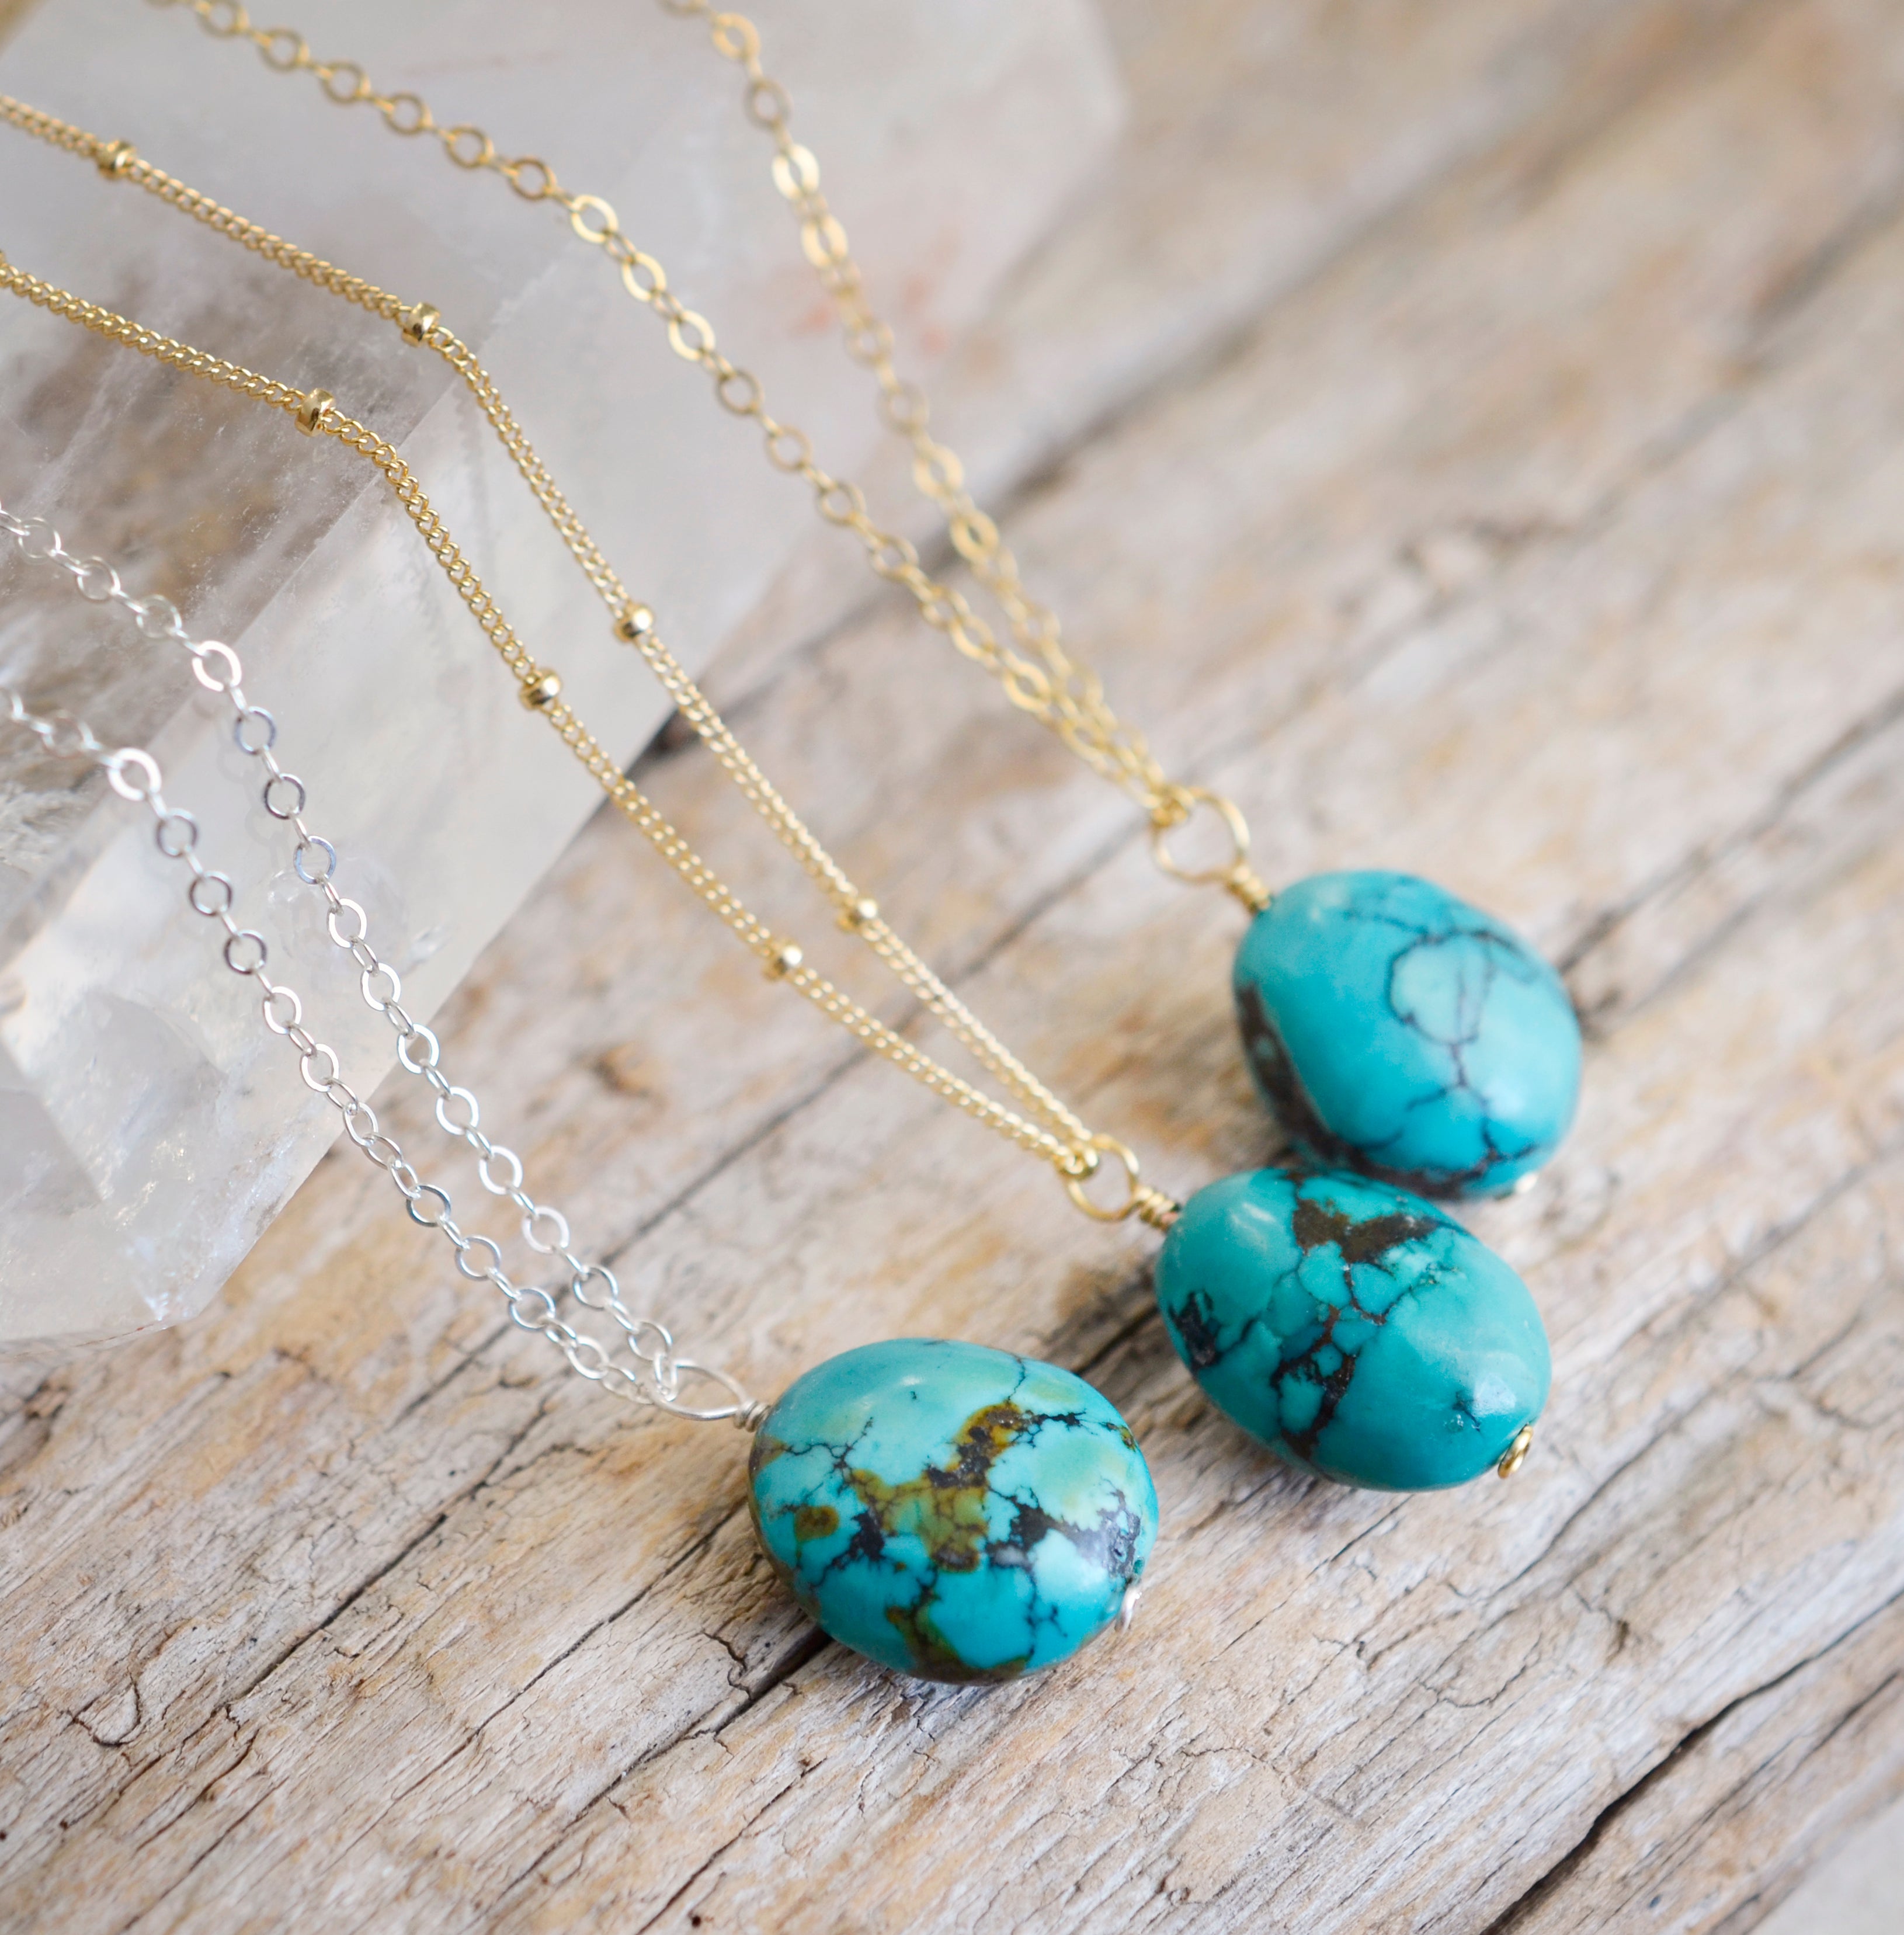 The Meaning Of Turquoise - The December Birthstone